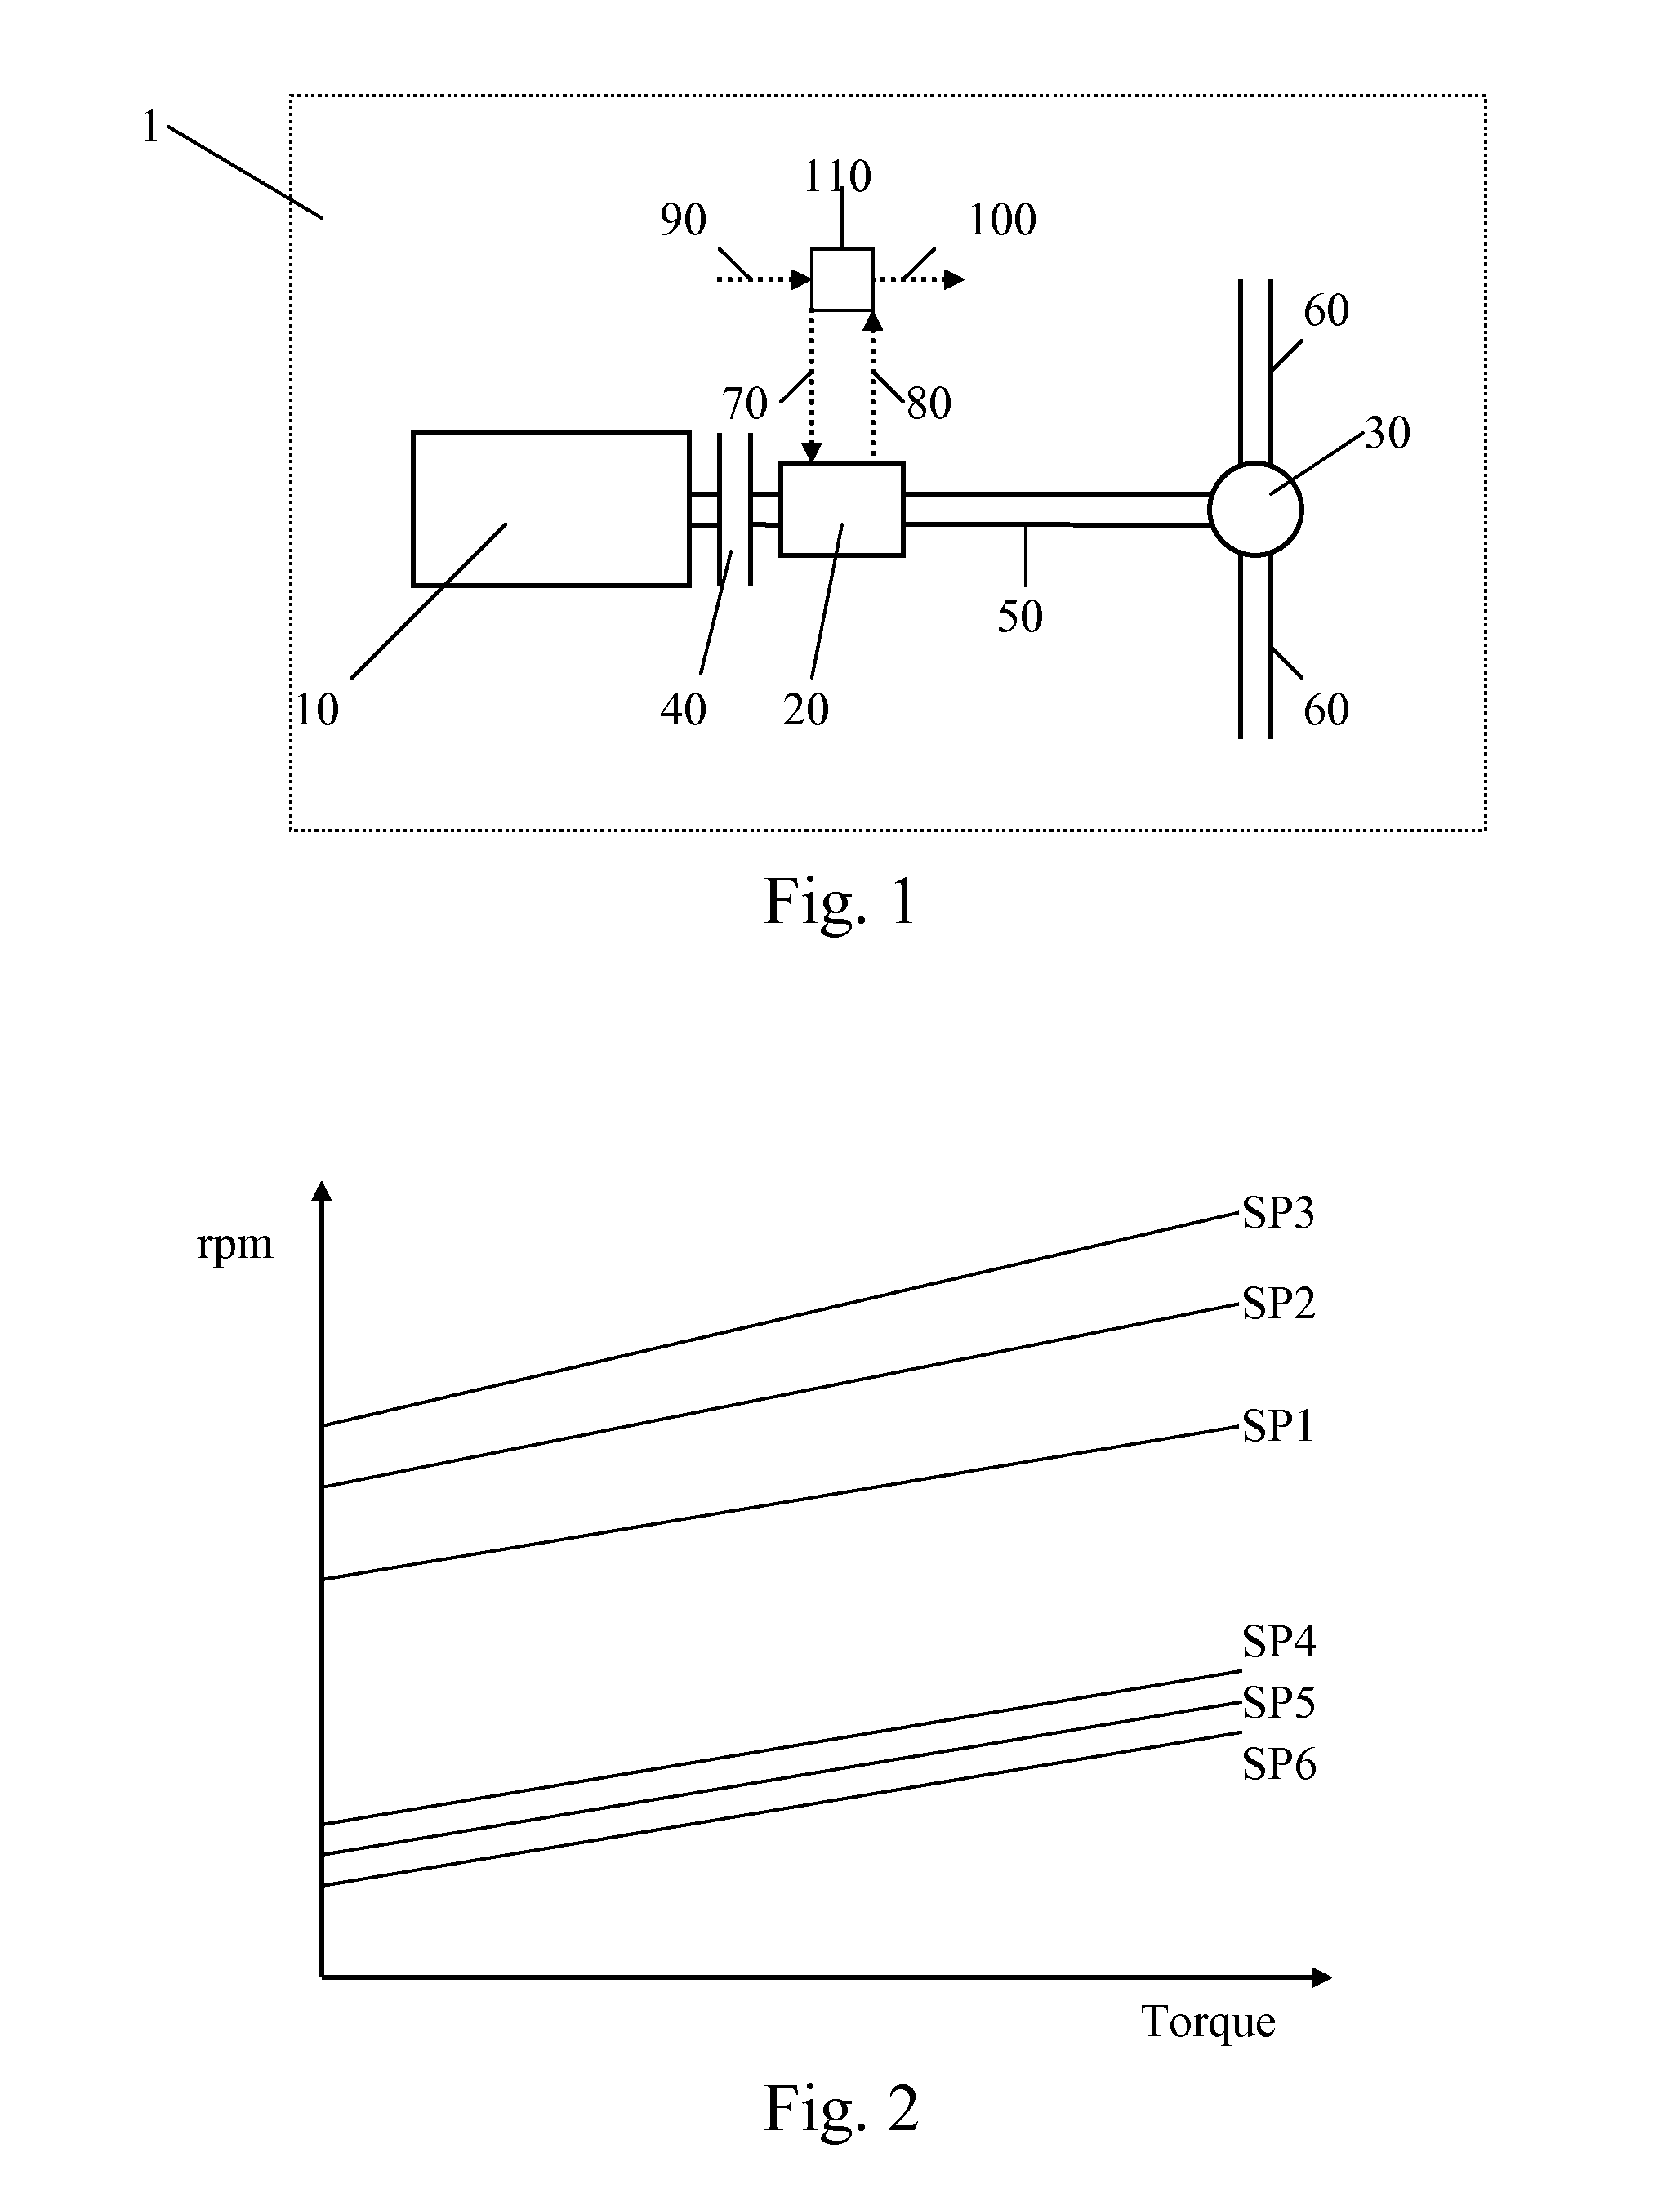 Method for determination of gearshift points